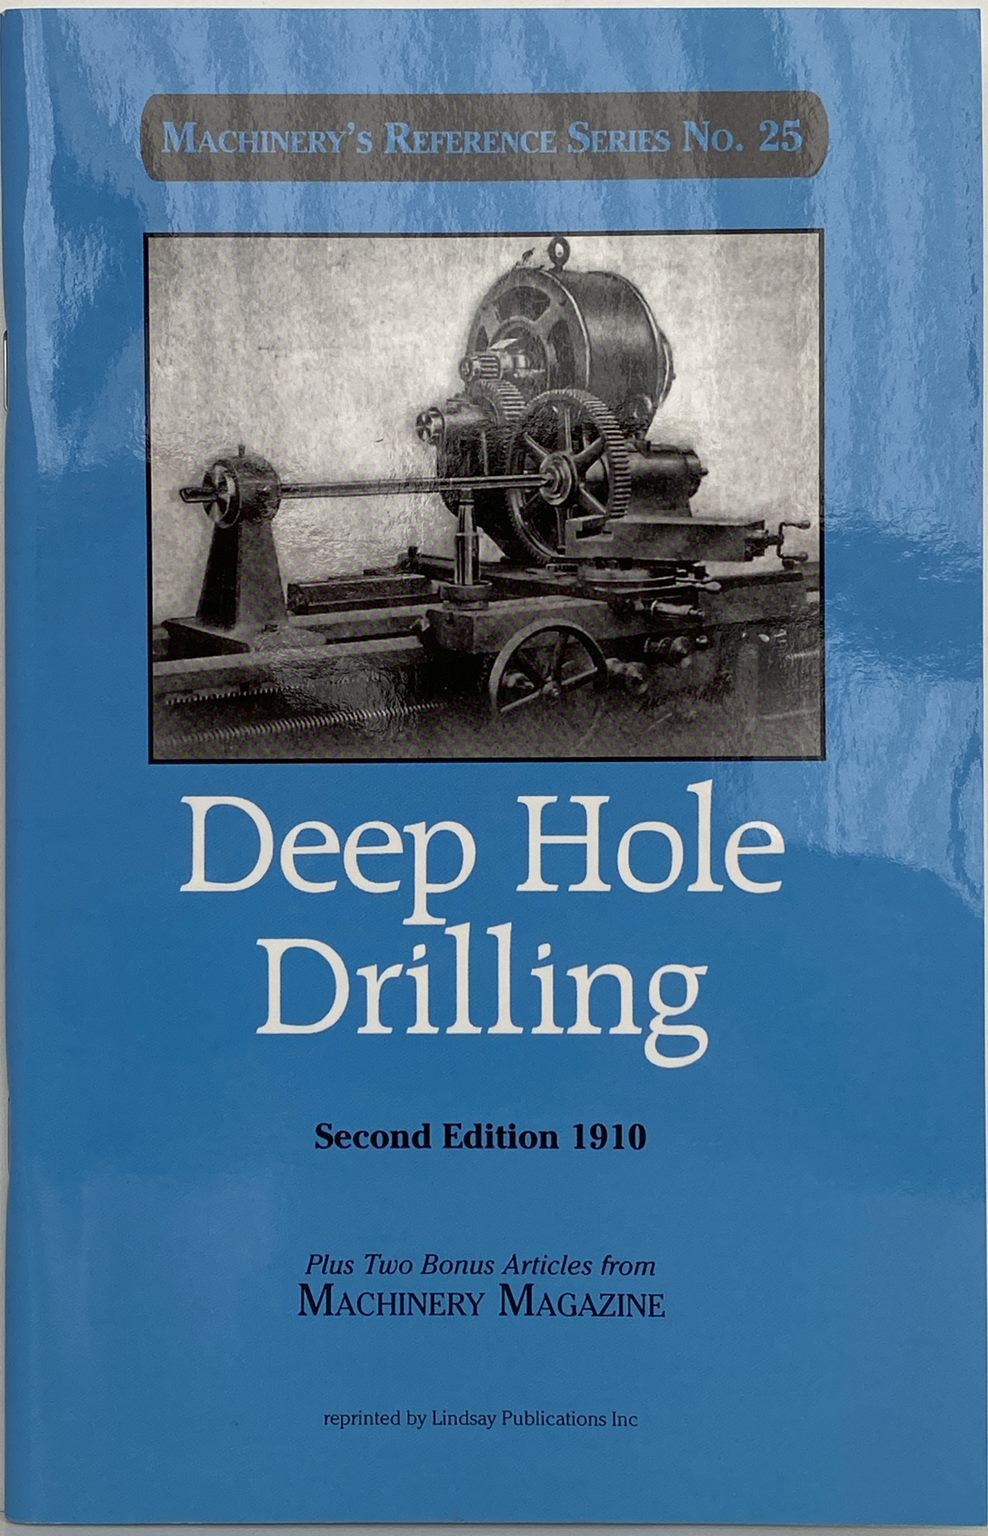 DEEP HOLE DRILLING - Machinery's Reference Series No. 25